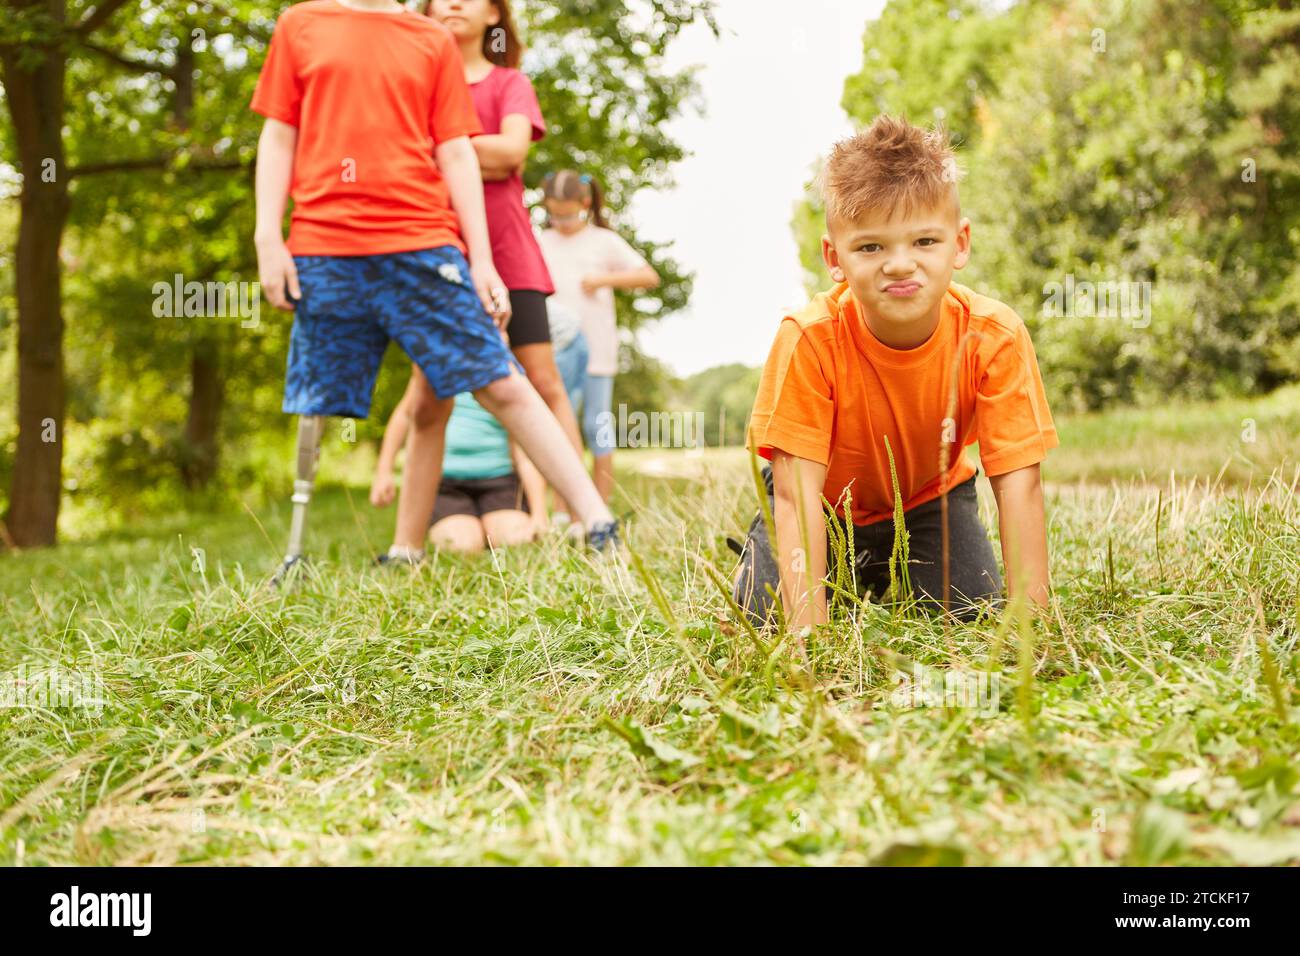 Portrait of boy wearing orange t-shirt kneeling on grass with friends standing in background at park Stock Photo